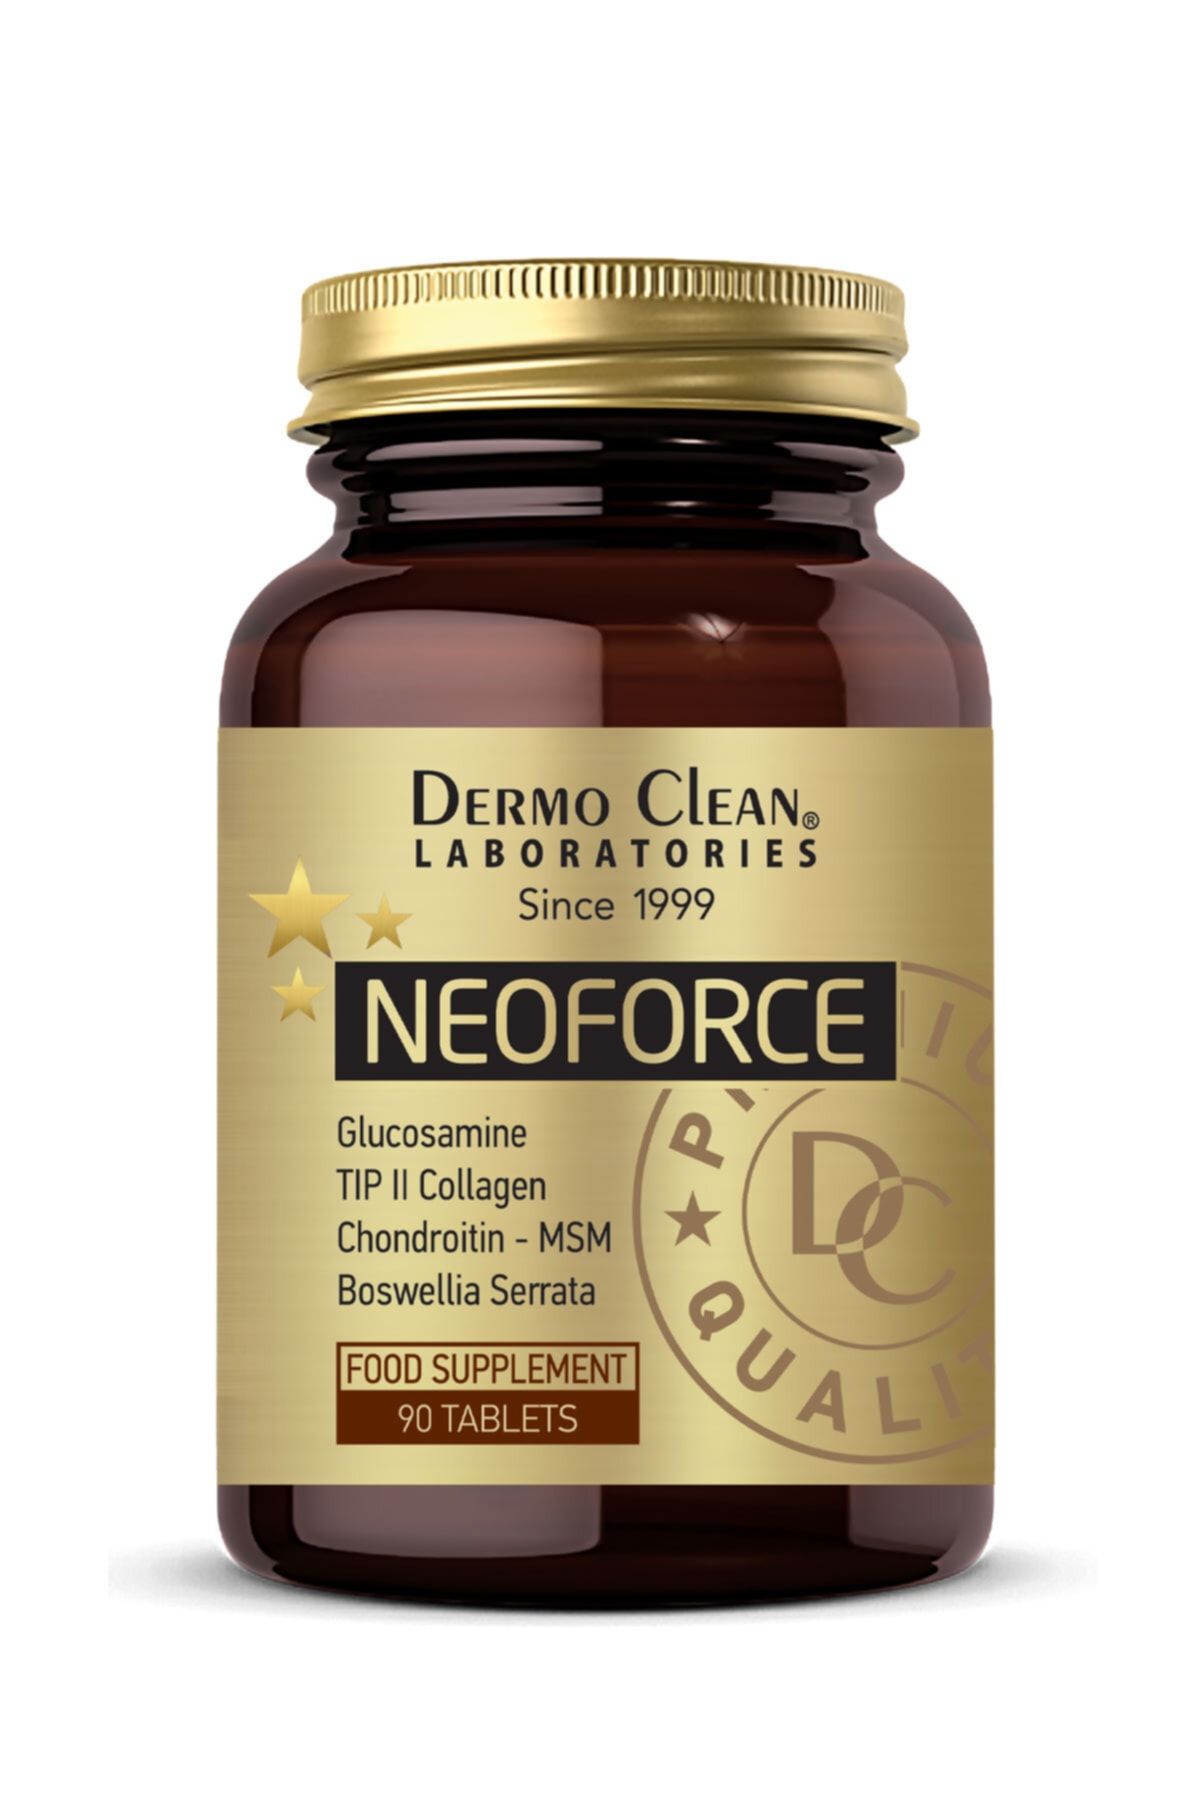 NeoForce Glucosamine, Chondroitin Msm Tip 2 Collagen, Hyaluronic Acid 90 Tablet